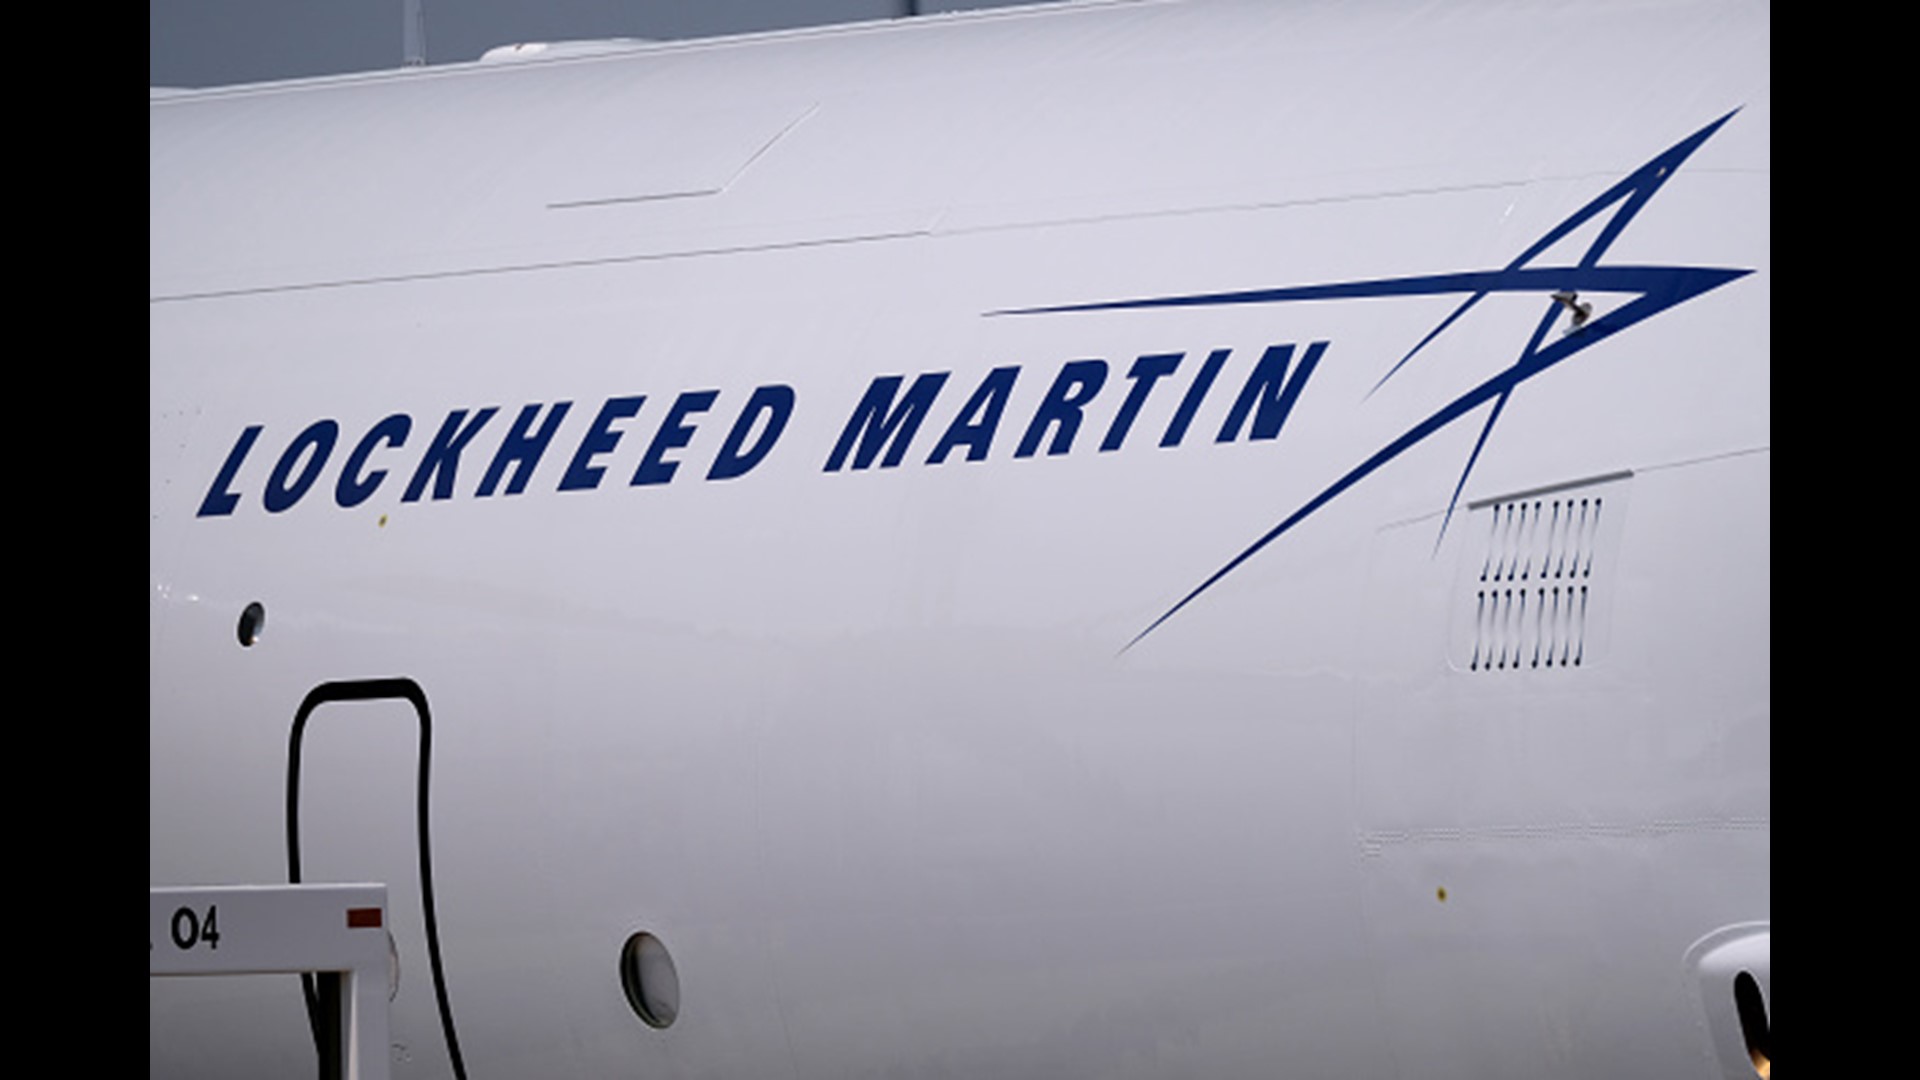 Lockheed schedules another job fair, hopes to fill at least 500 jobs